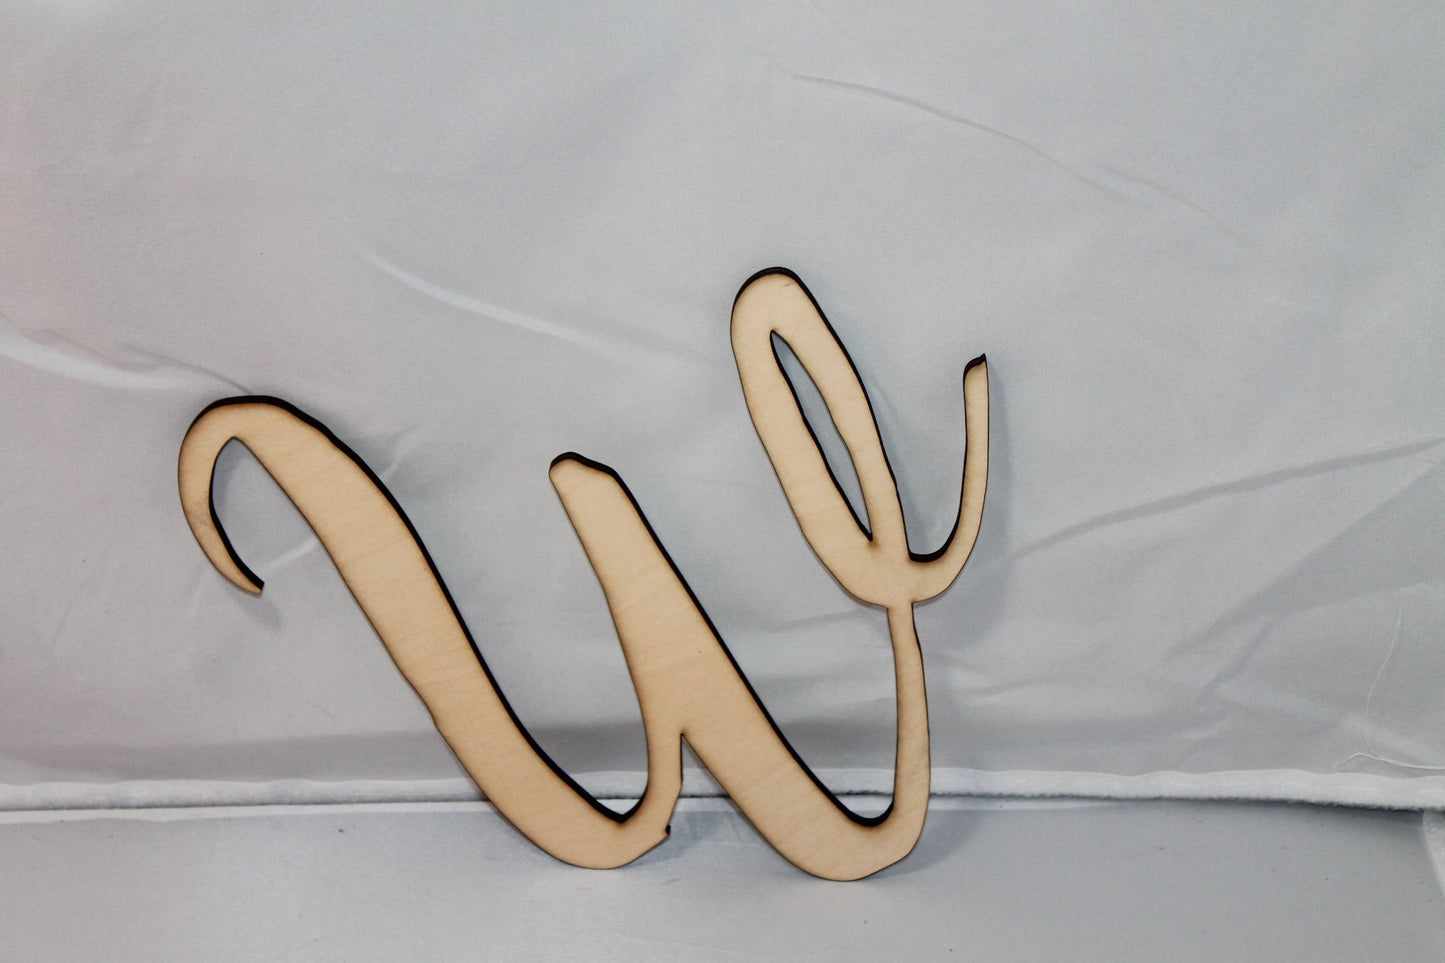 Wooden Letter W, Laser Cut Out, Wood Cut Out, Custom Word Art, Personalize, Footstepsinthepast